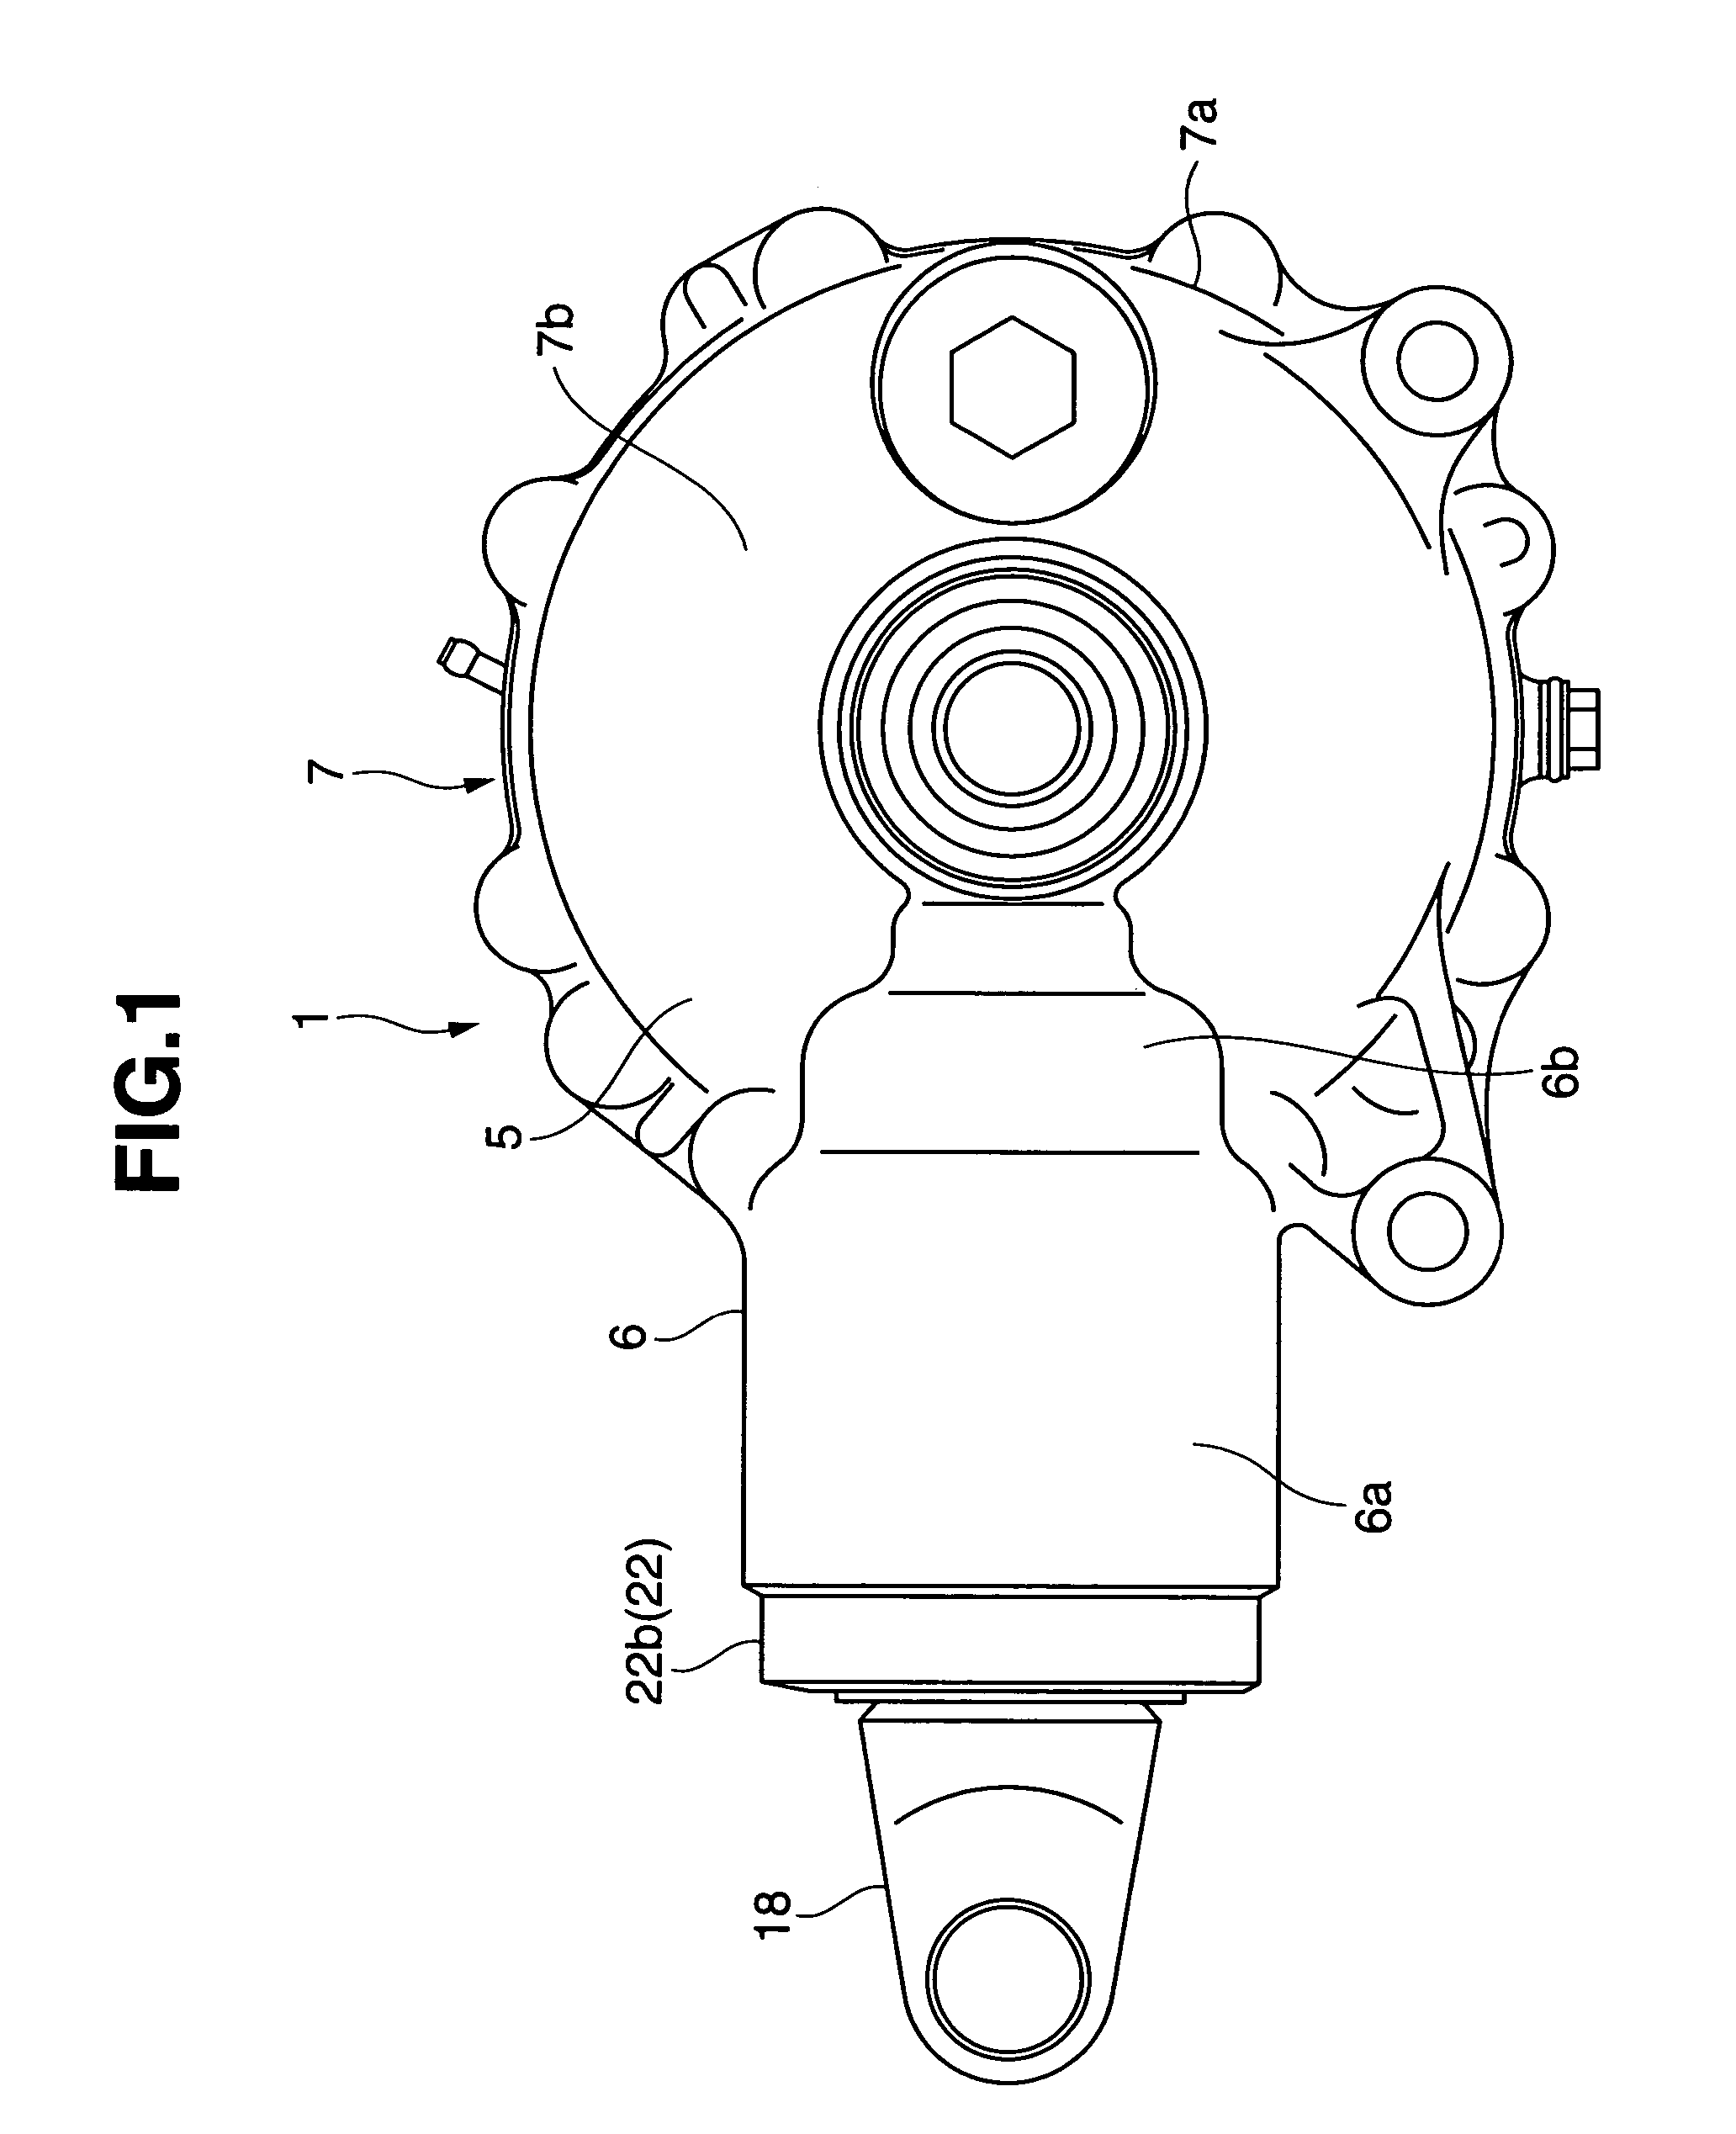 Drive system switching control method